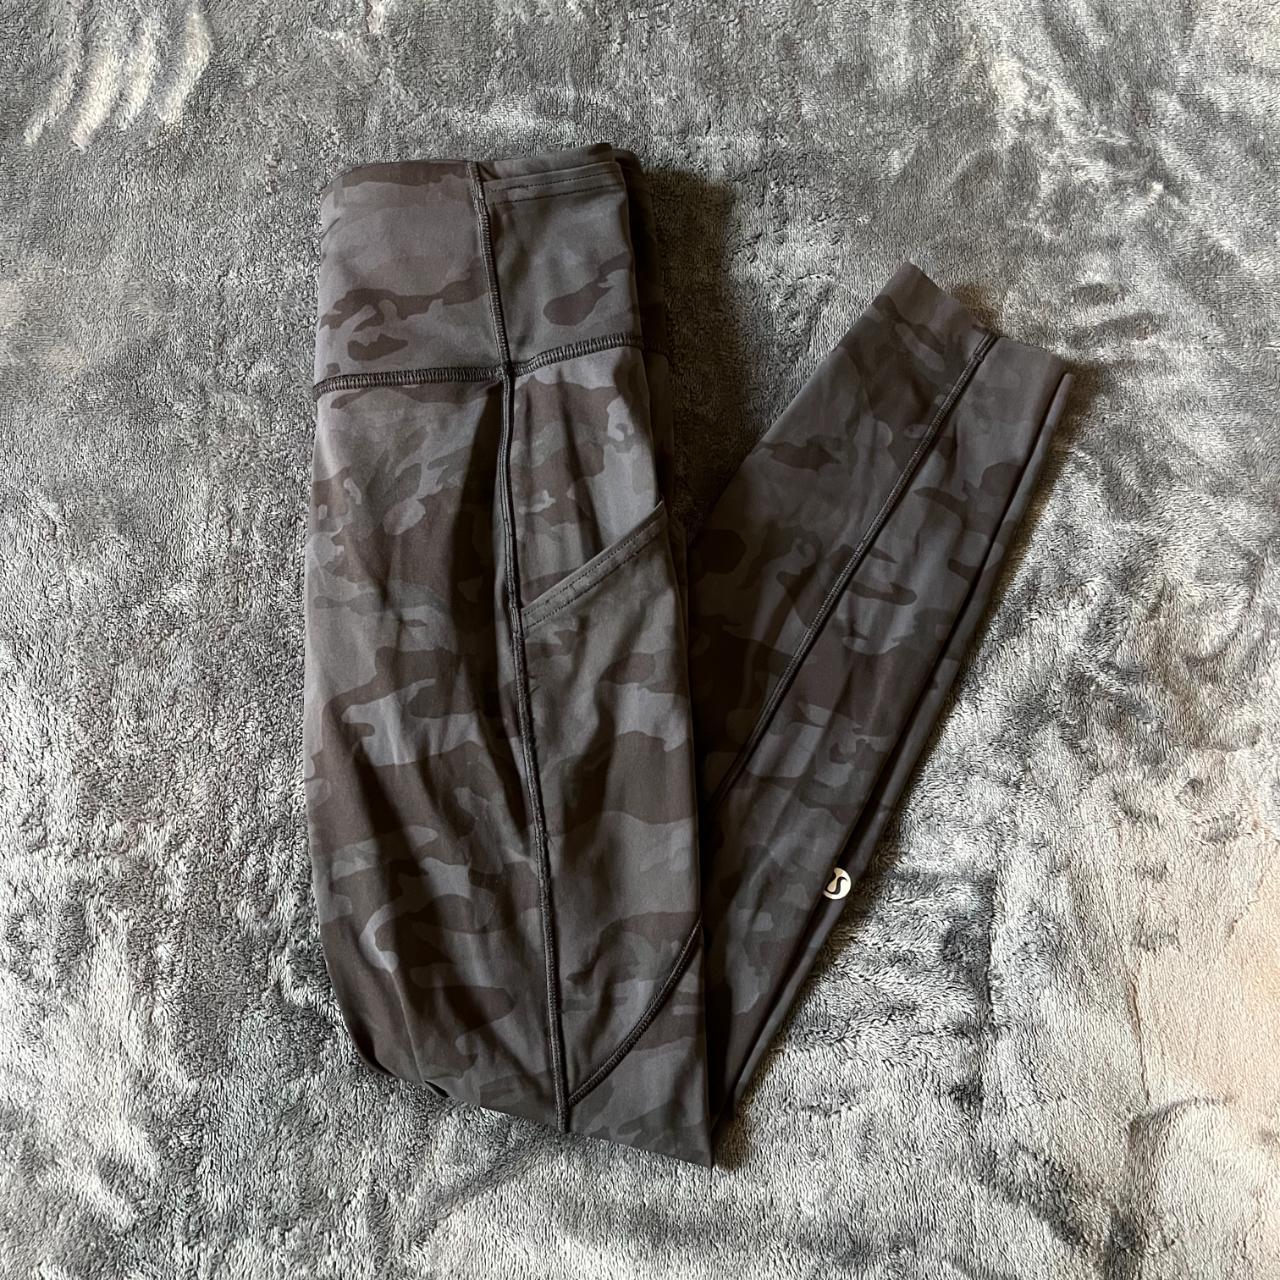 Lululemon Fast and Free Tight II 25 *Non-Reflective - Depop